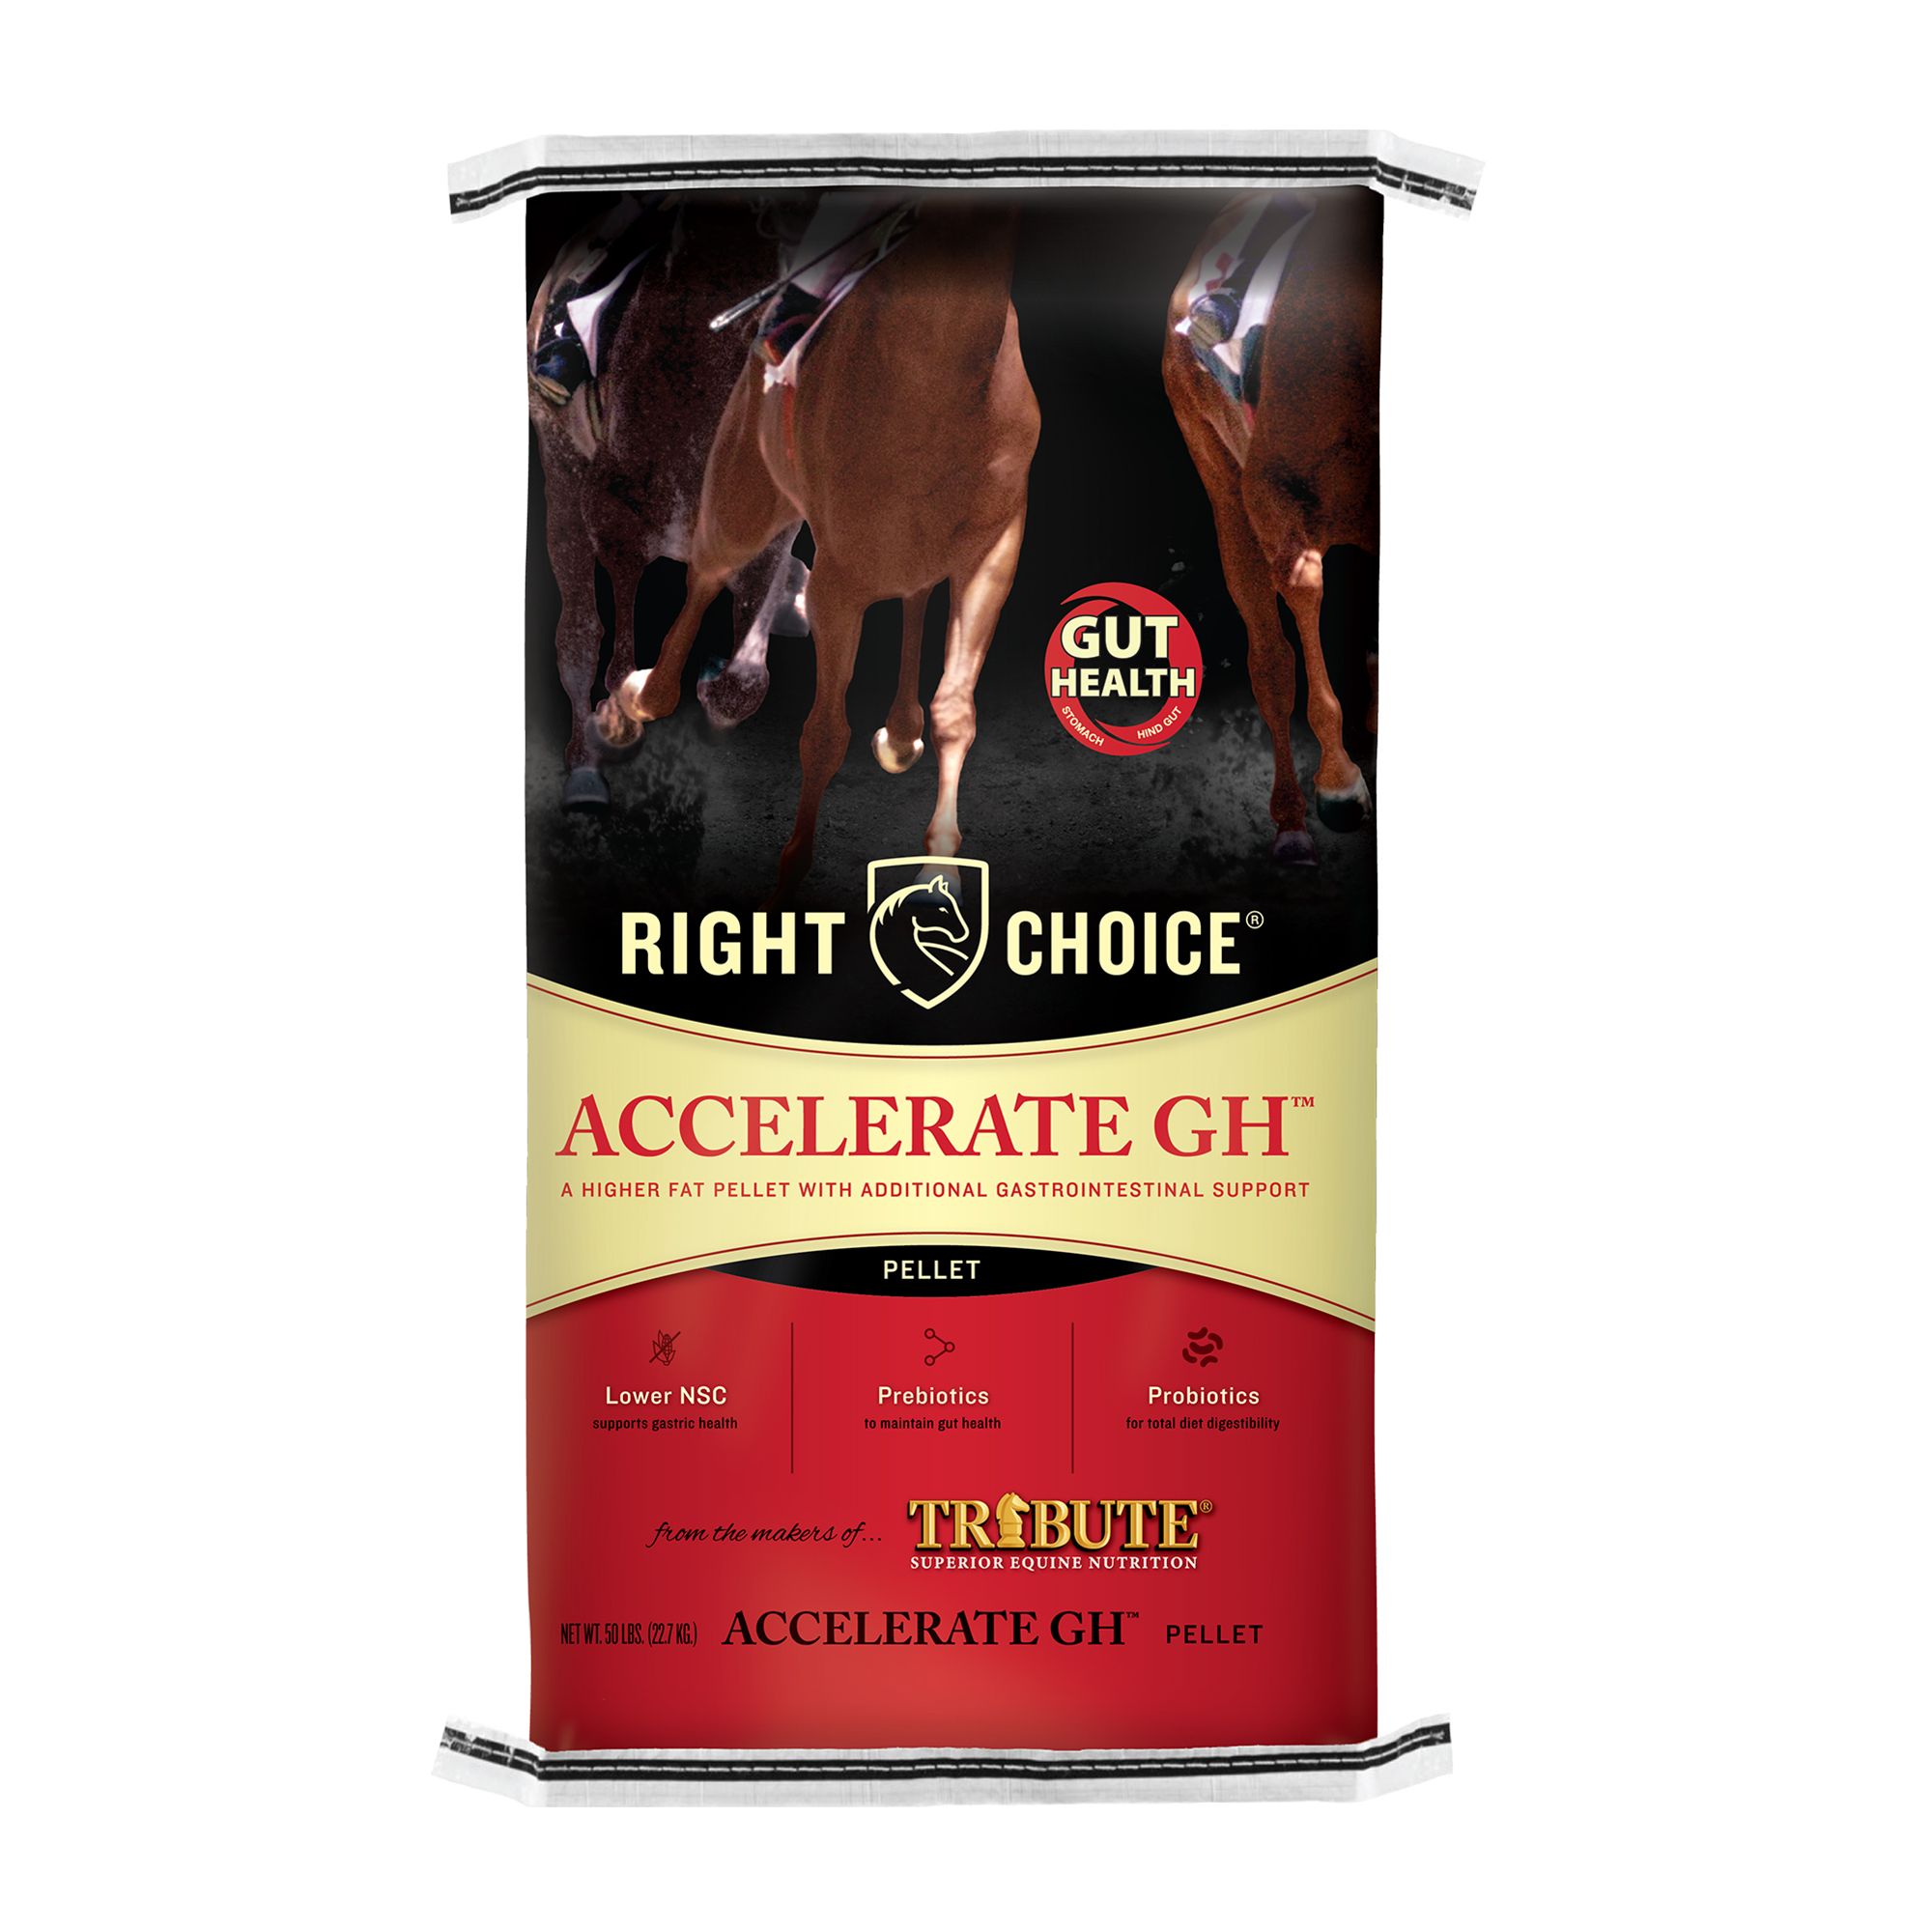 Right Choice® Accelerate GH® Horse Feed